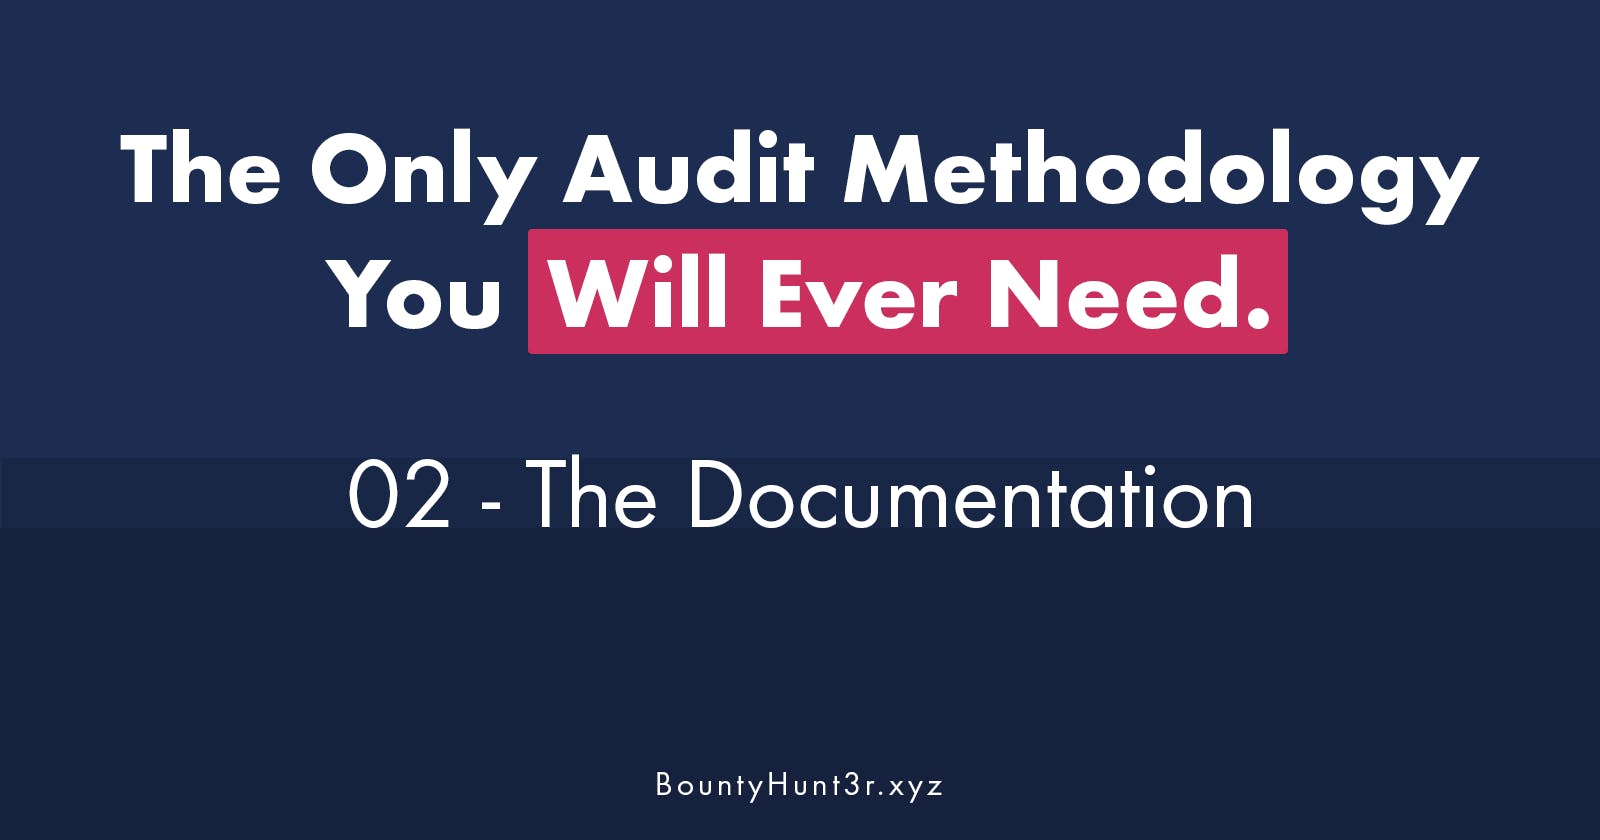 The Only Audit Methodology You Will Ever Need. 02 - The Documentation.